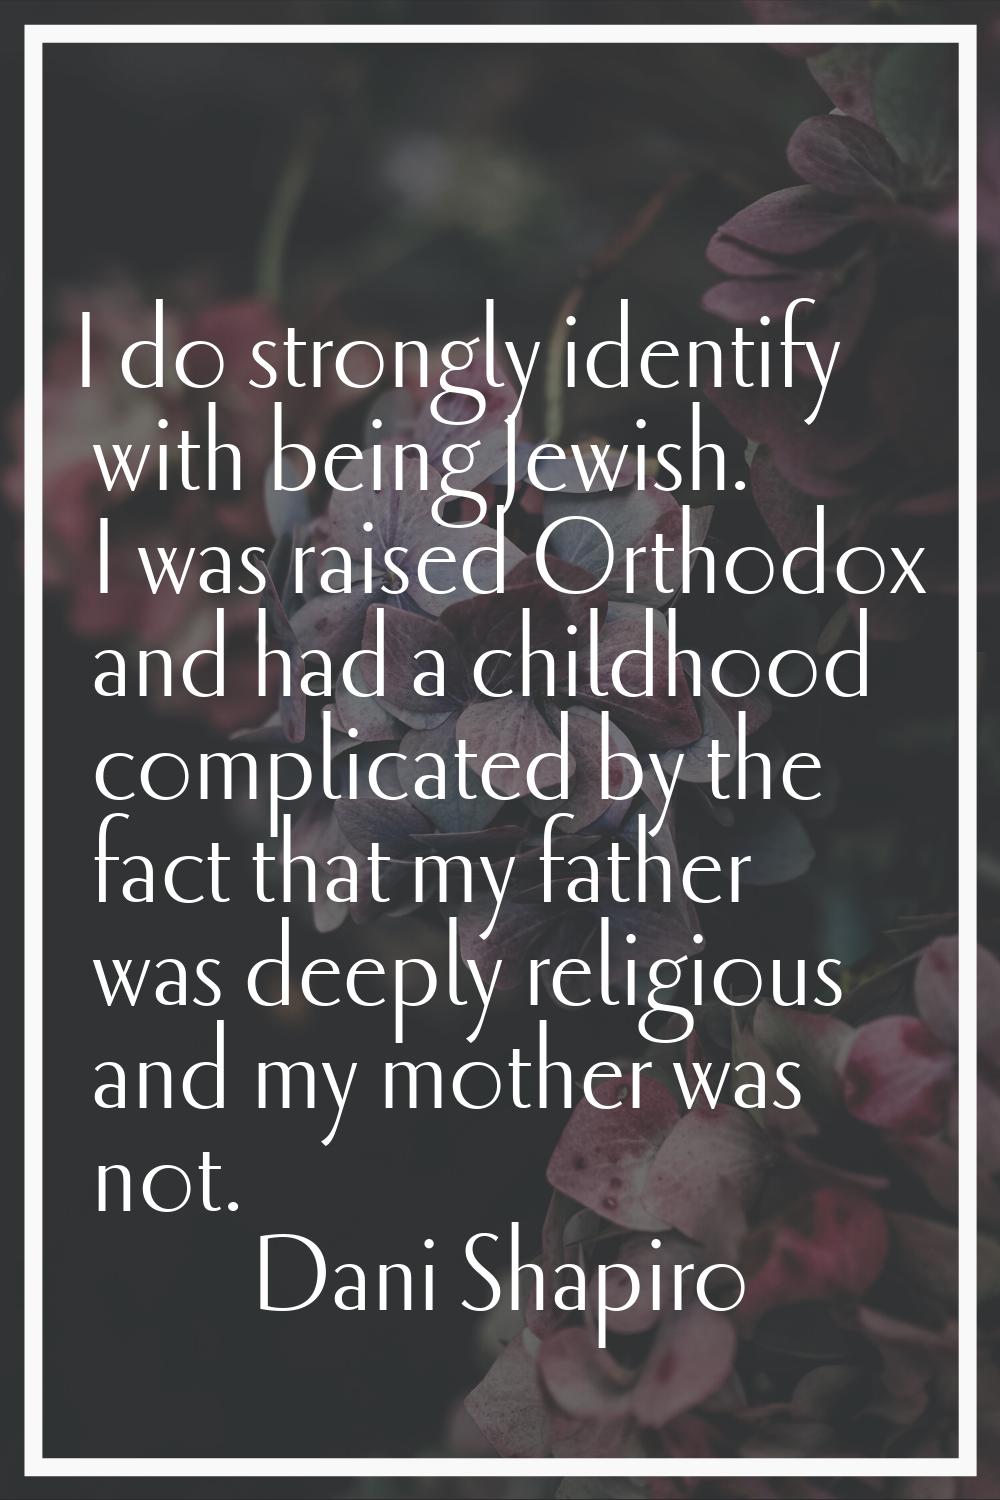 I do strongly identify with being Jewish. I was raised Orthodox and had a childhood complicated by 